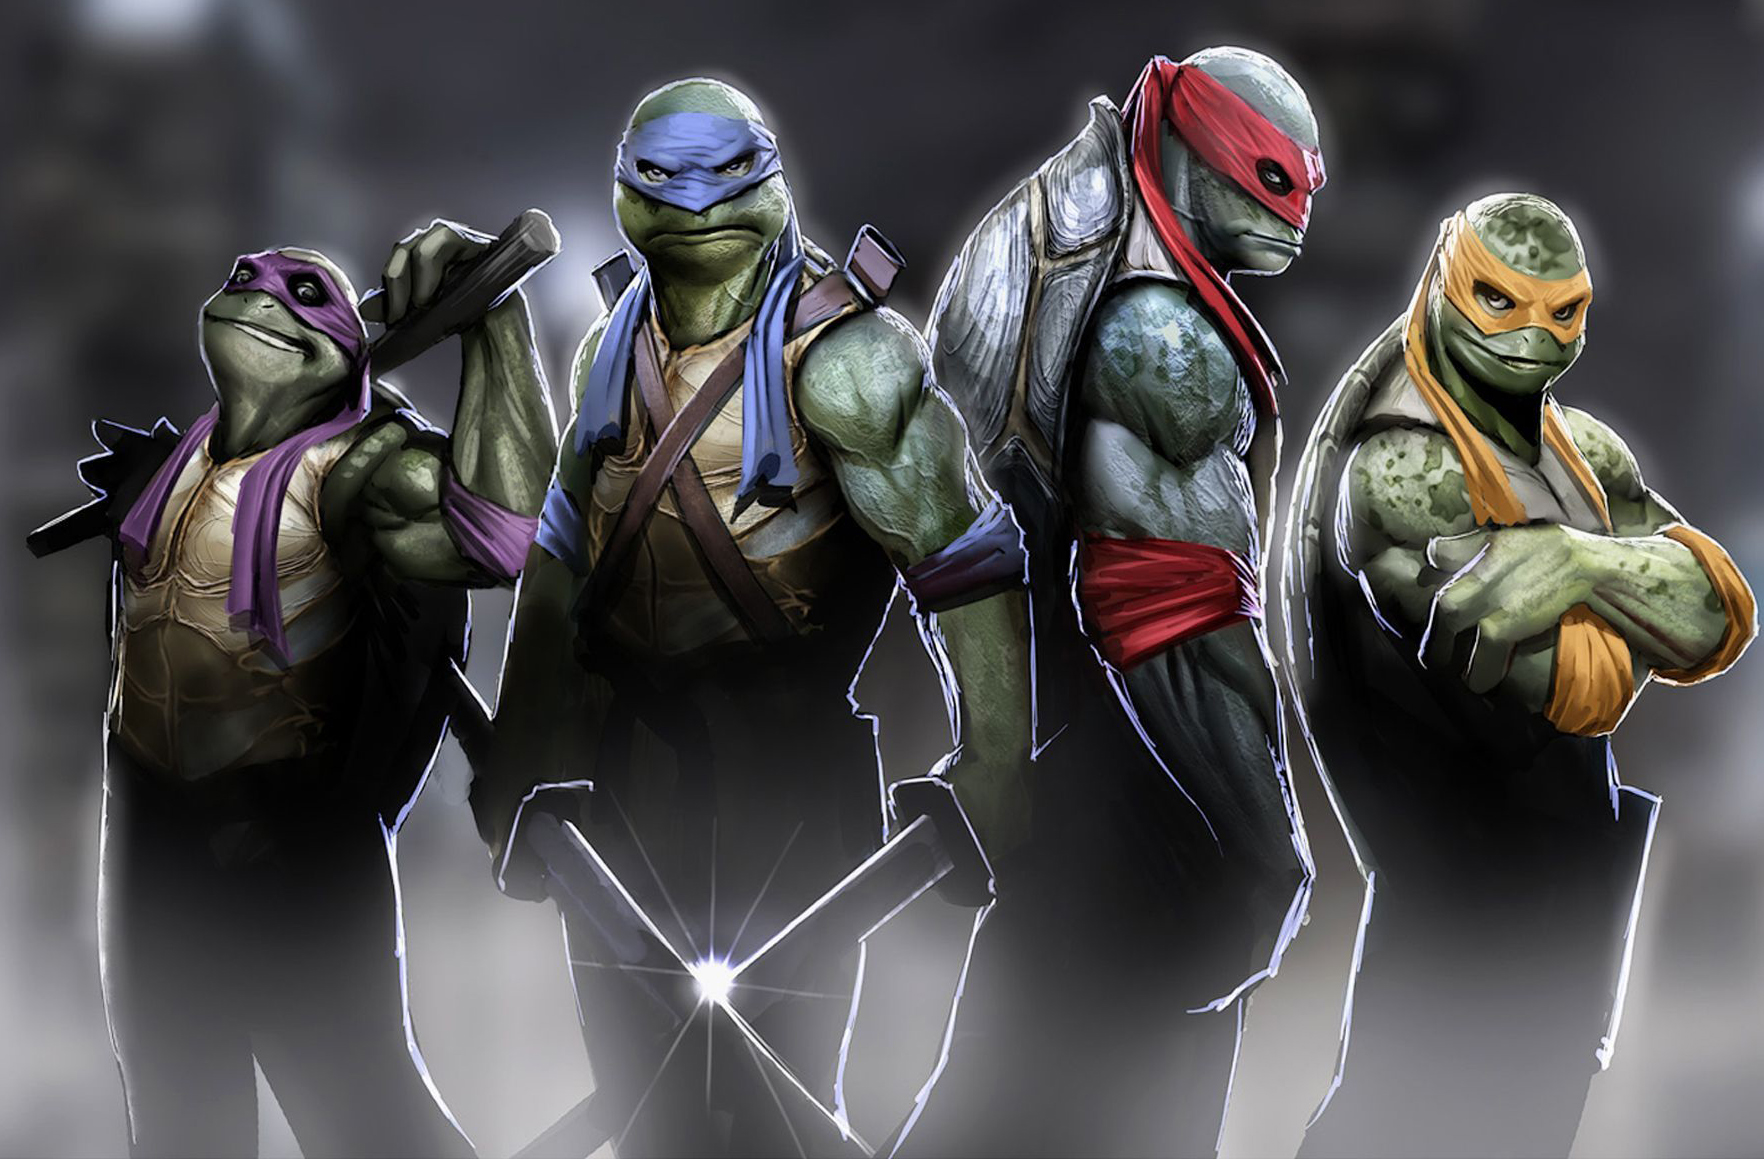 TMNT review by Robert Sousa